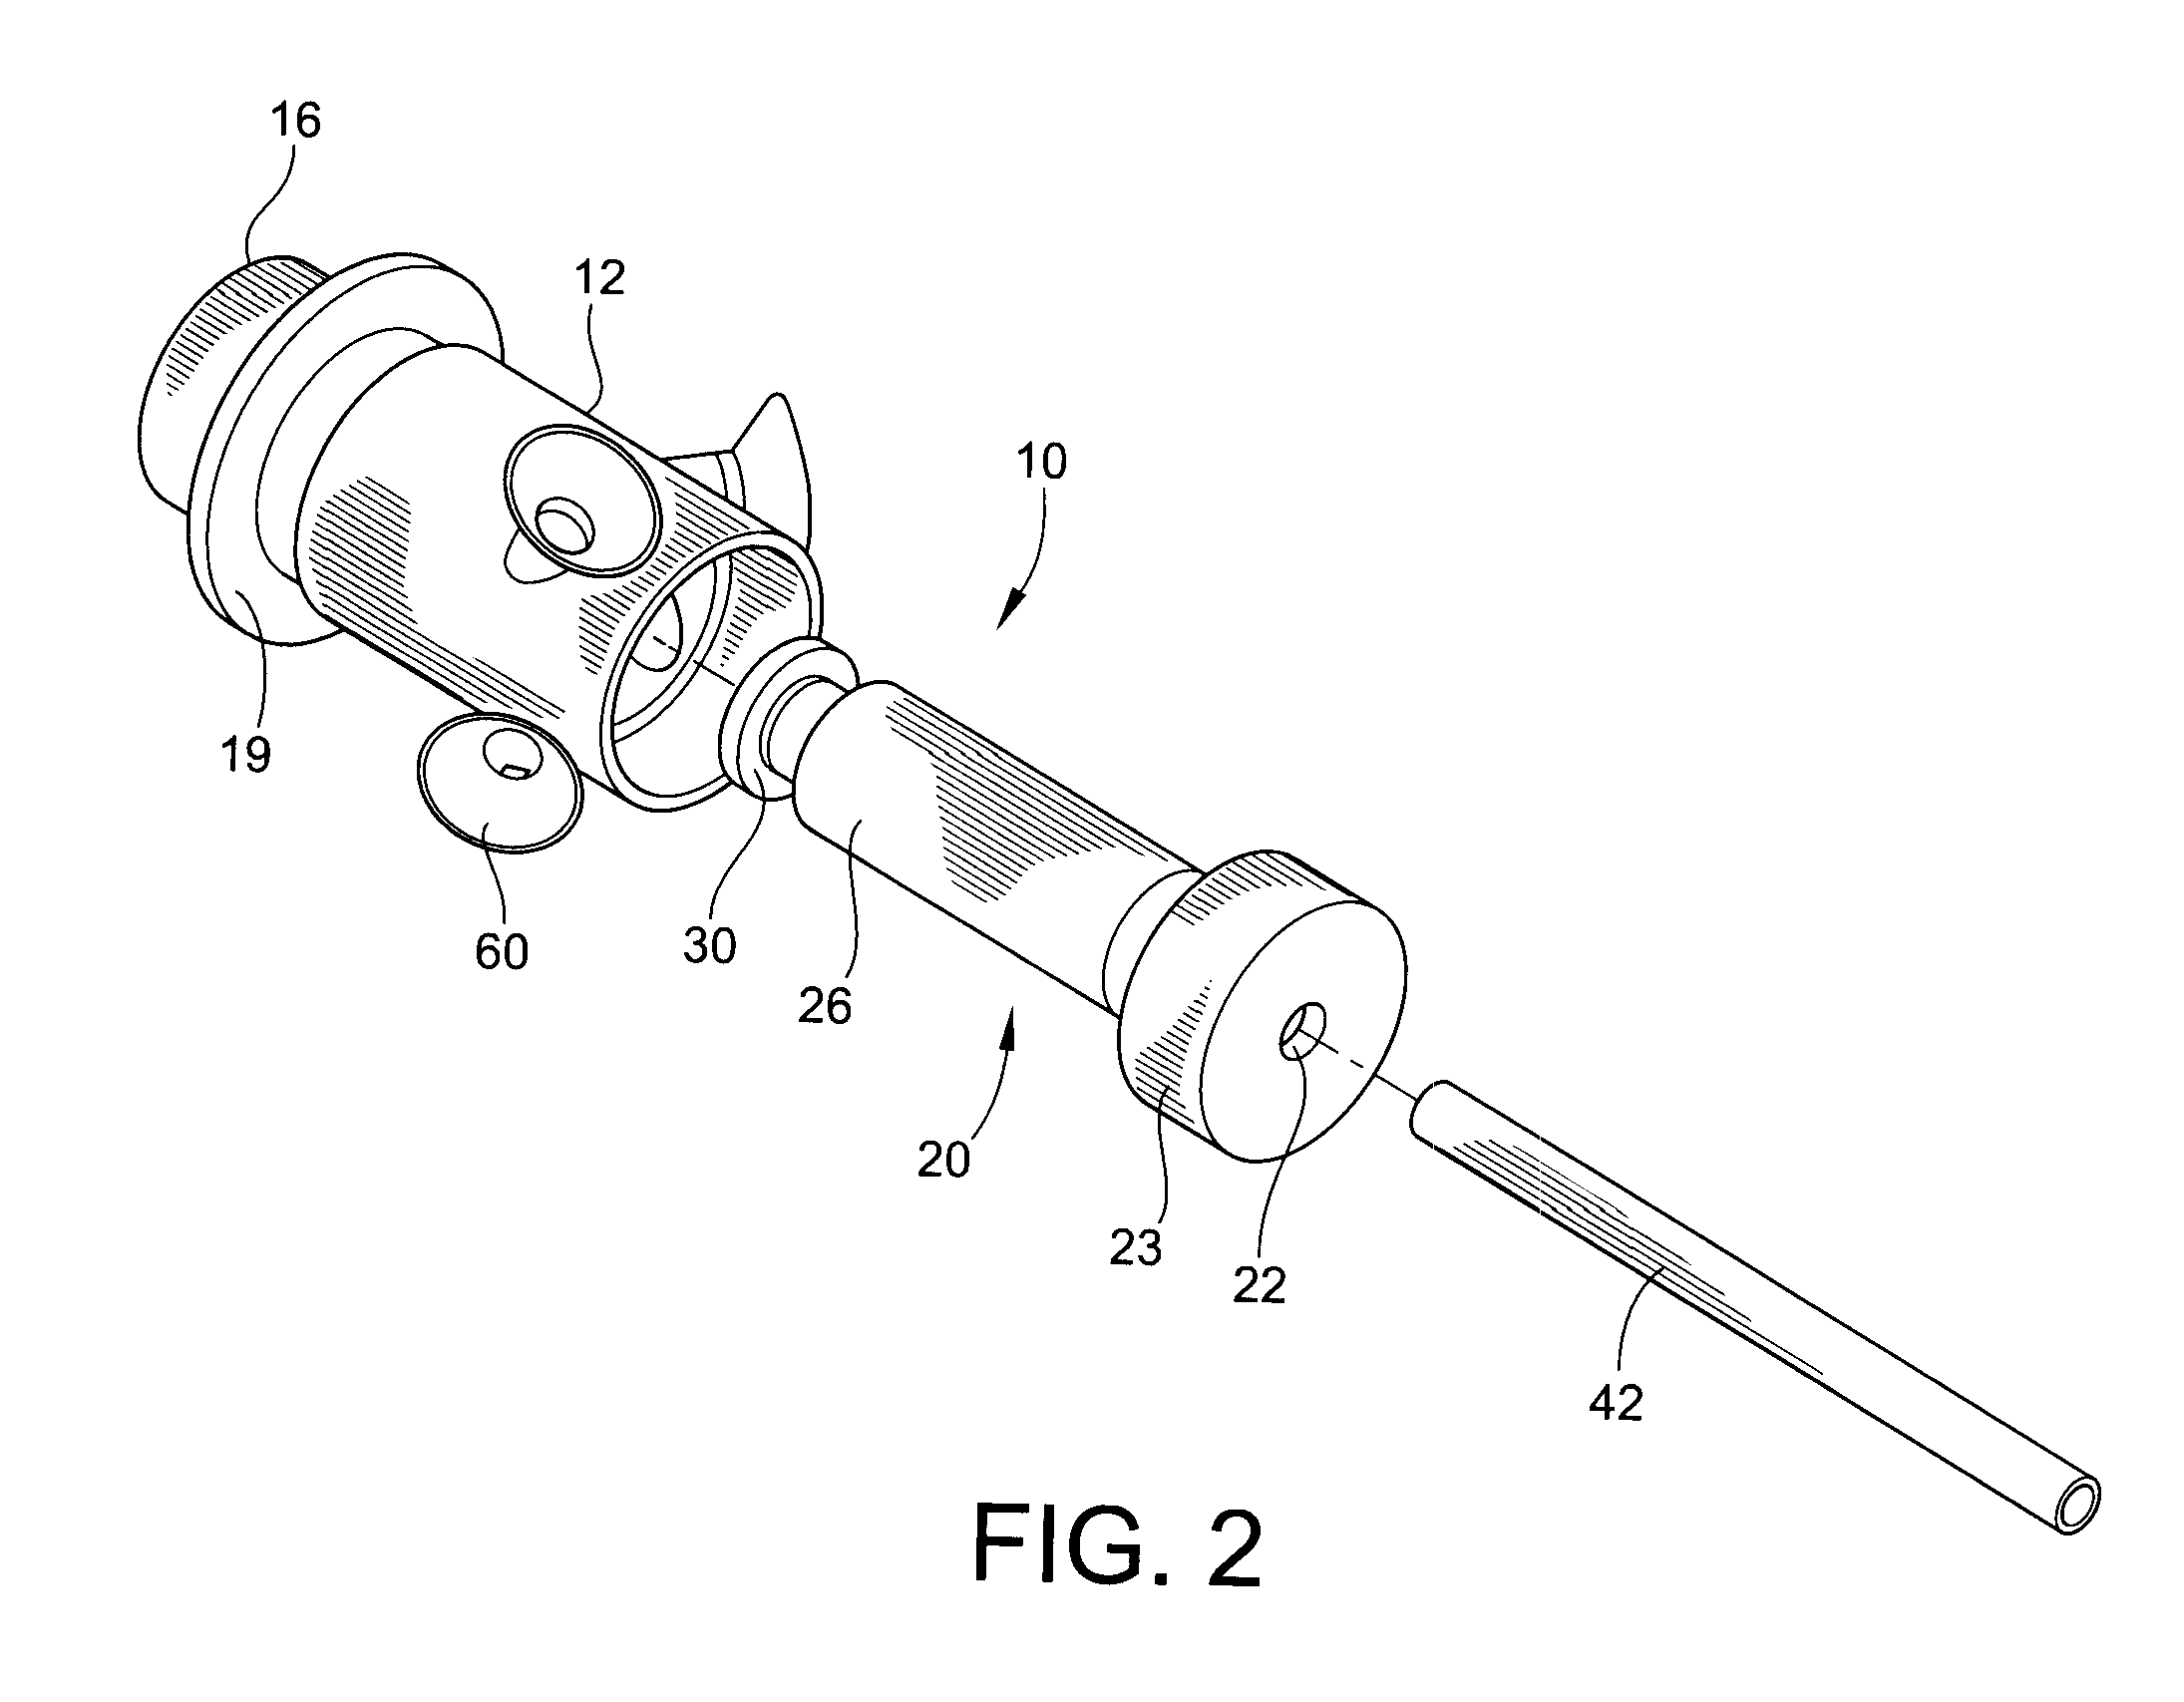 Premixing injector for gas turbine engines